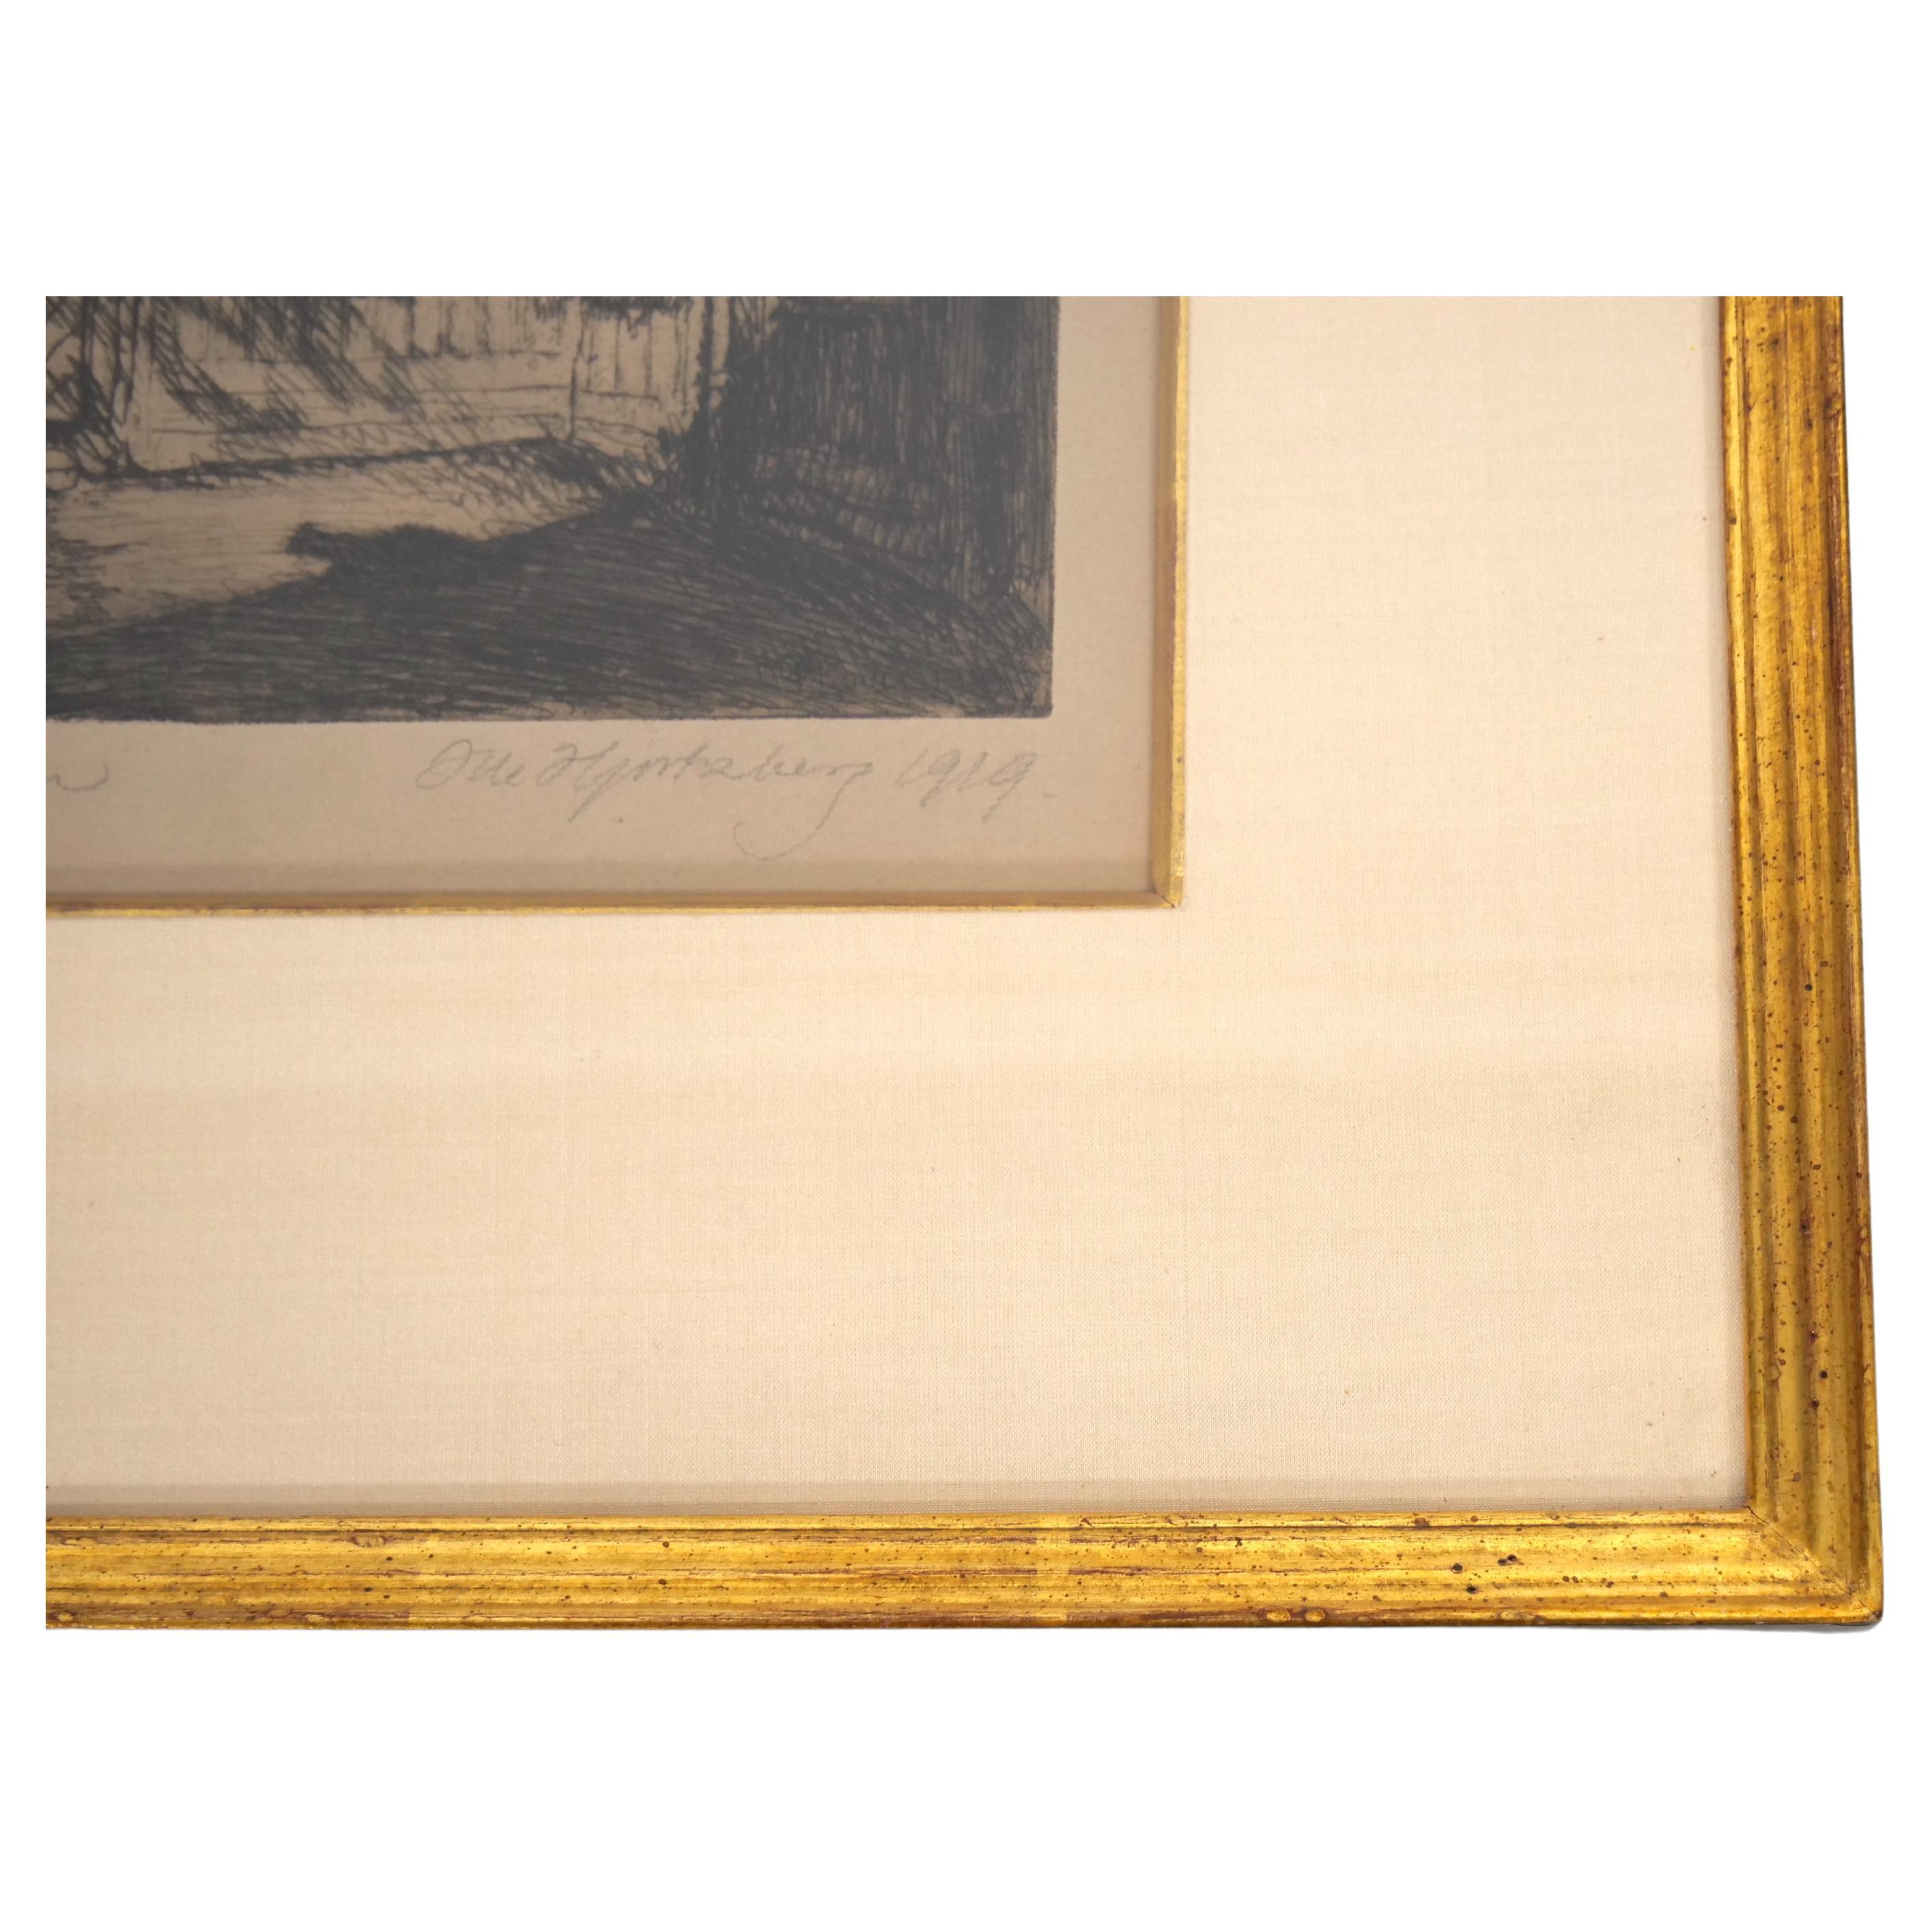 20th Century Two Framed Architectural Etchings by Olle Hjortzberg (1872-1959) For Sale